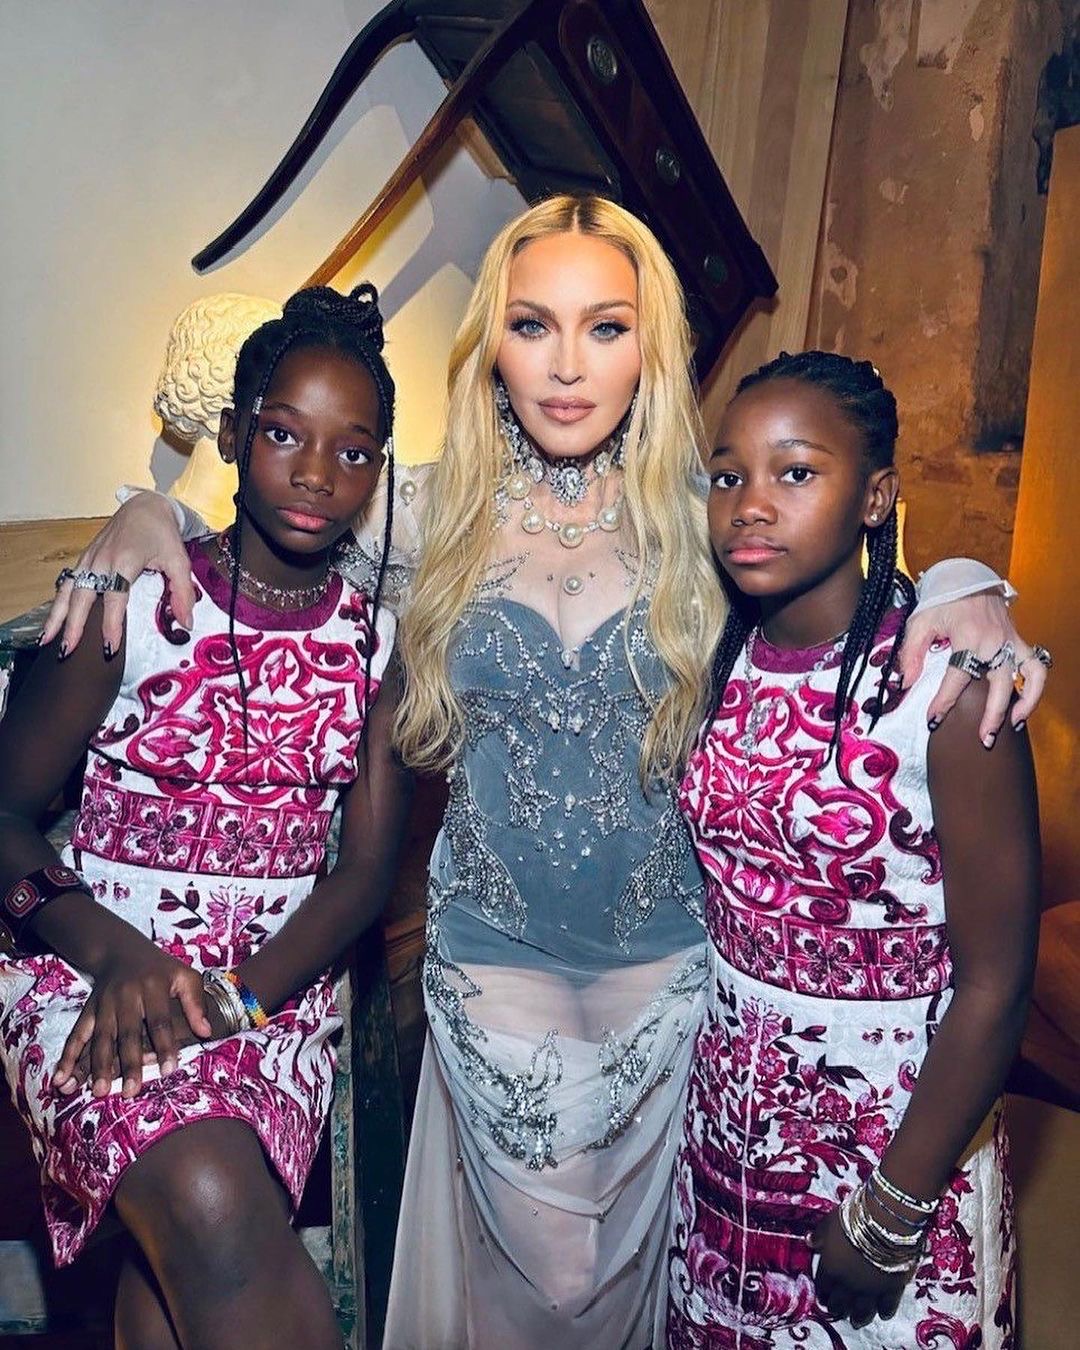 The Queen of Pop Madonna Celebrates Her 65th Birthday with Daughters Stella and Estere in Matching Dolce Gabbana Prints 1